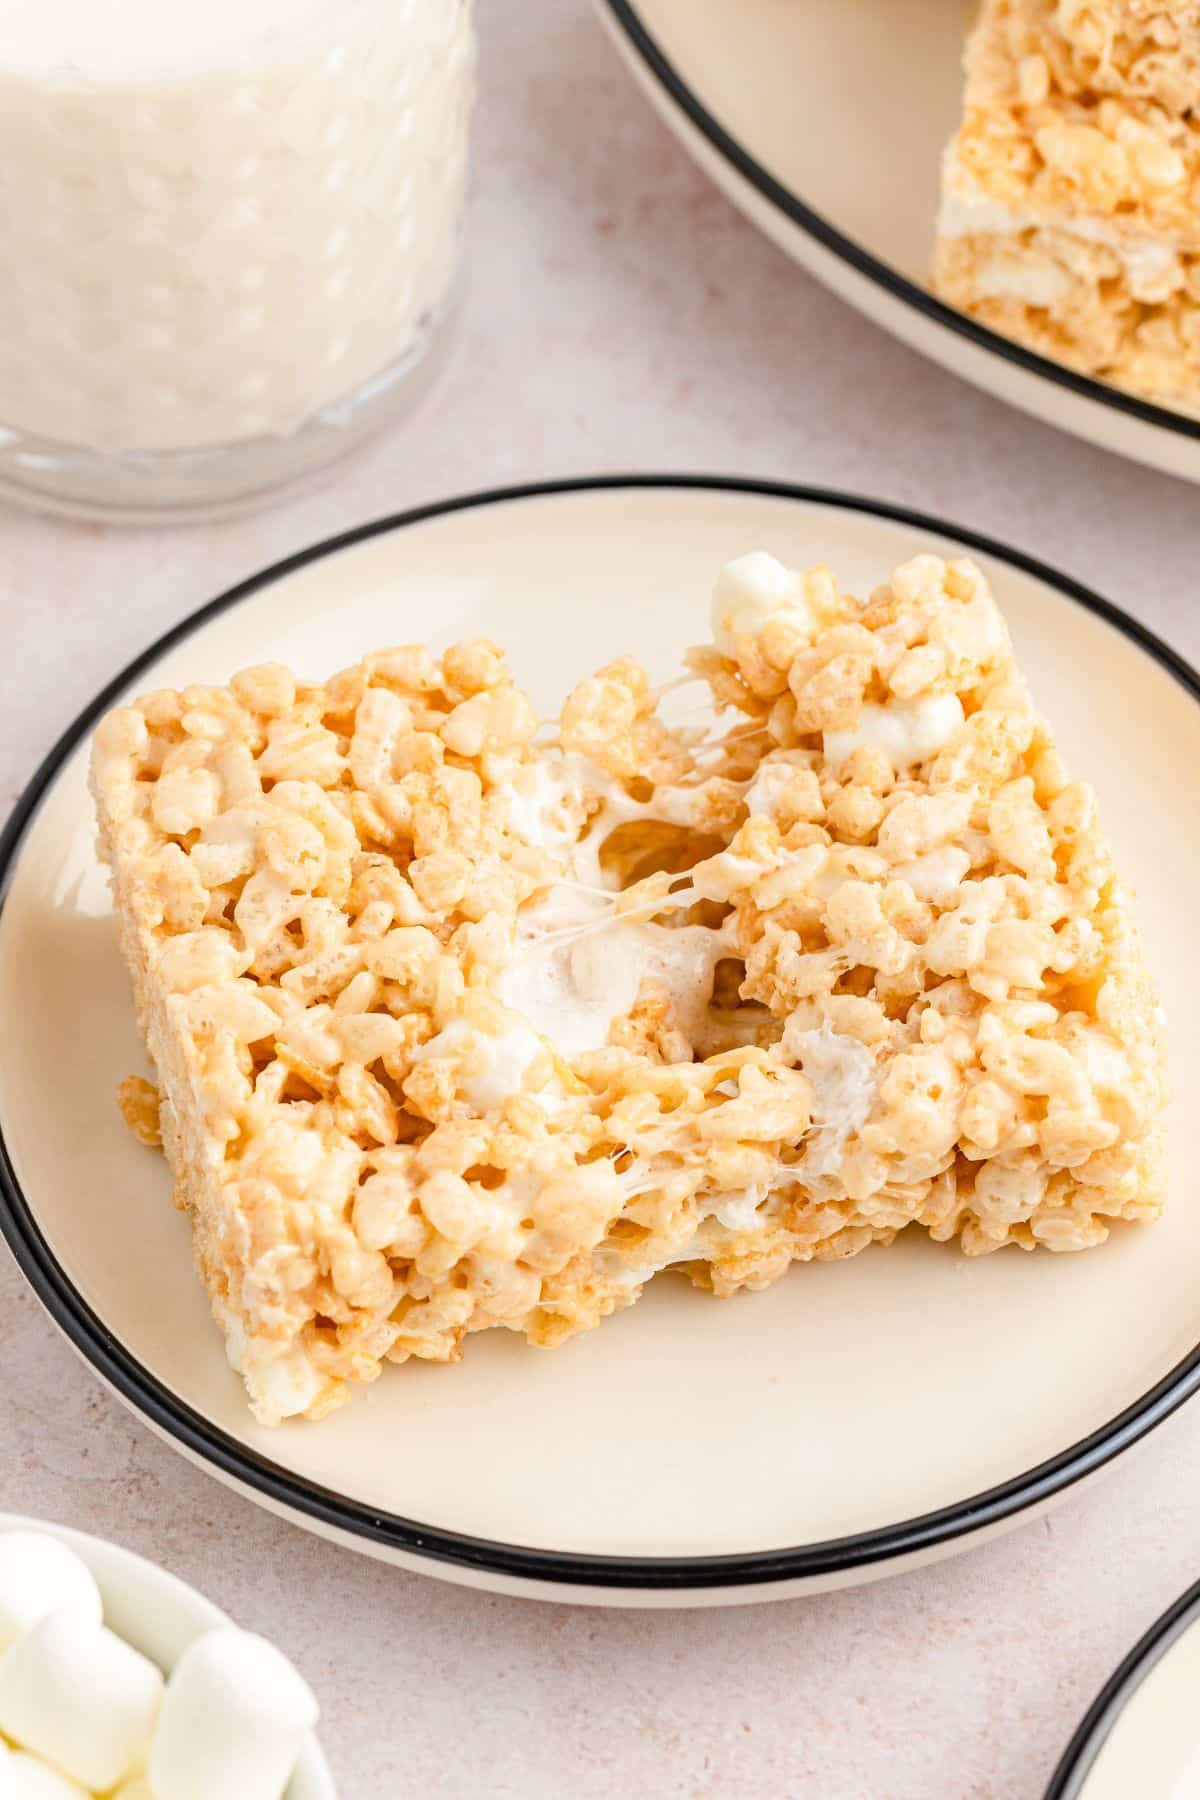 krispies treat pulled in half with gooey marshmallow in middle